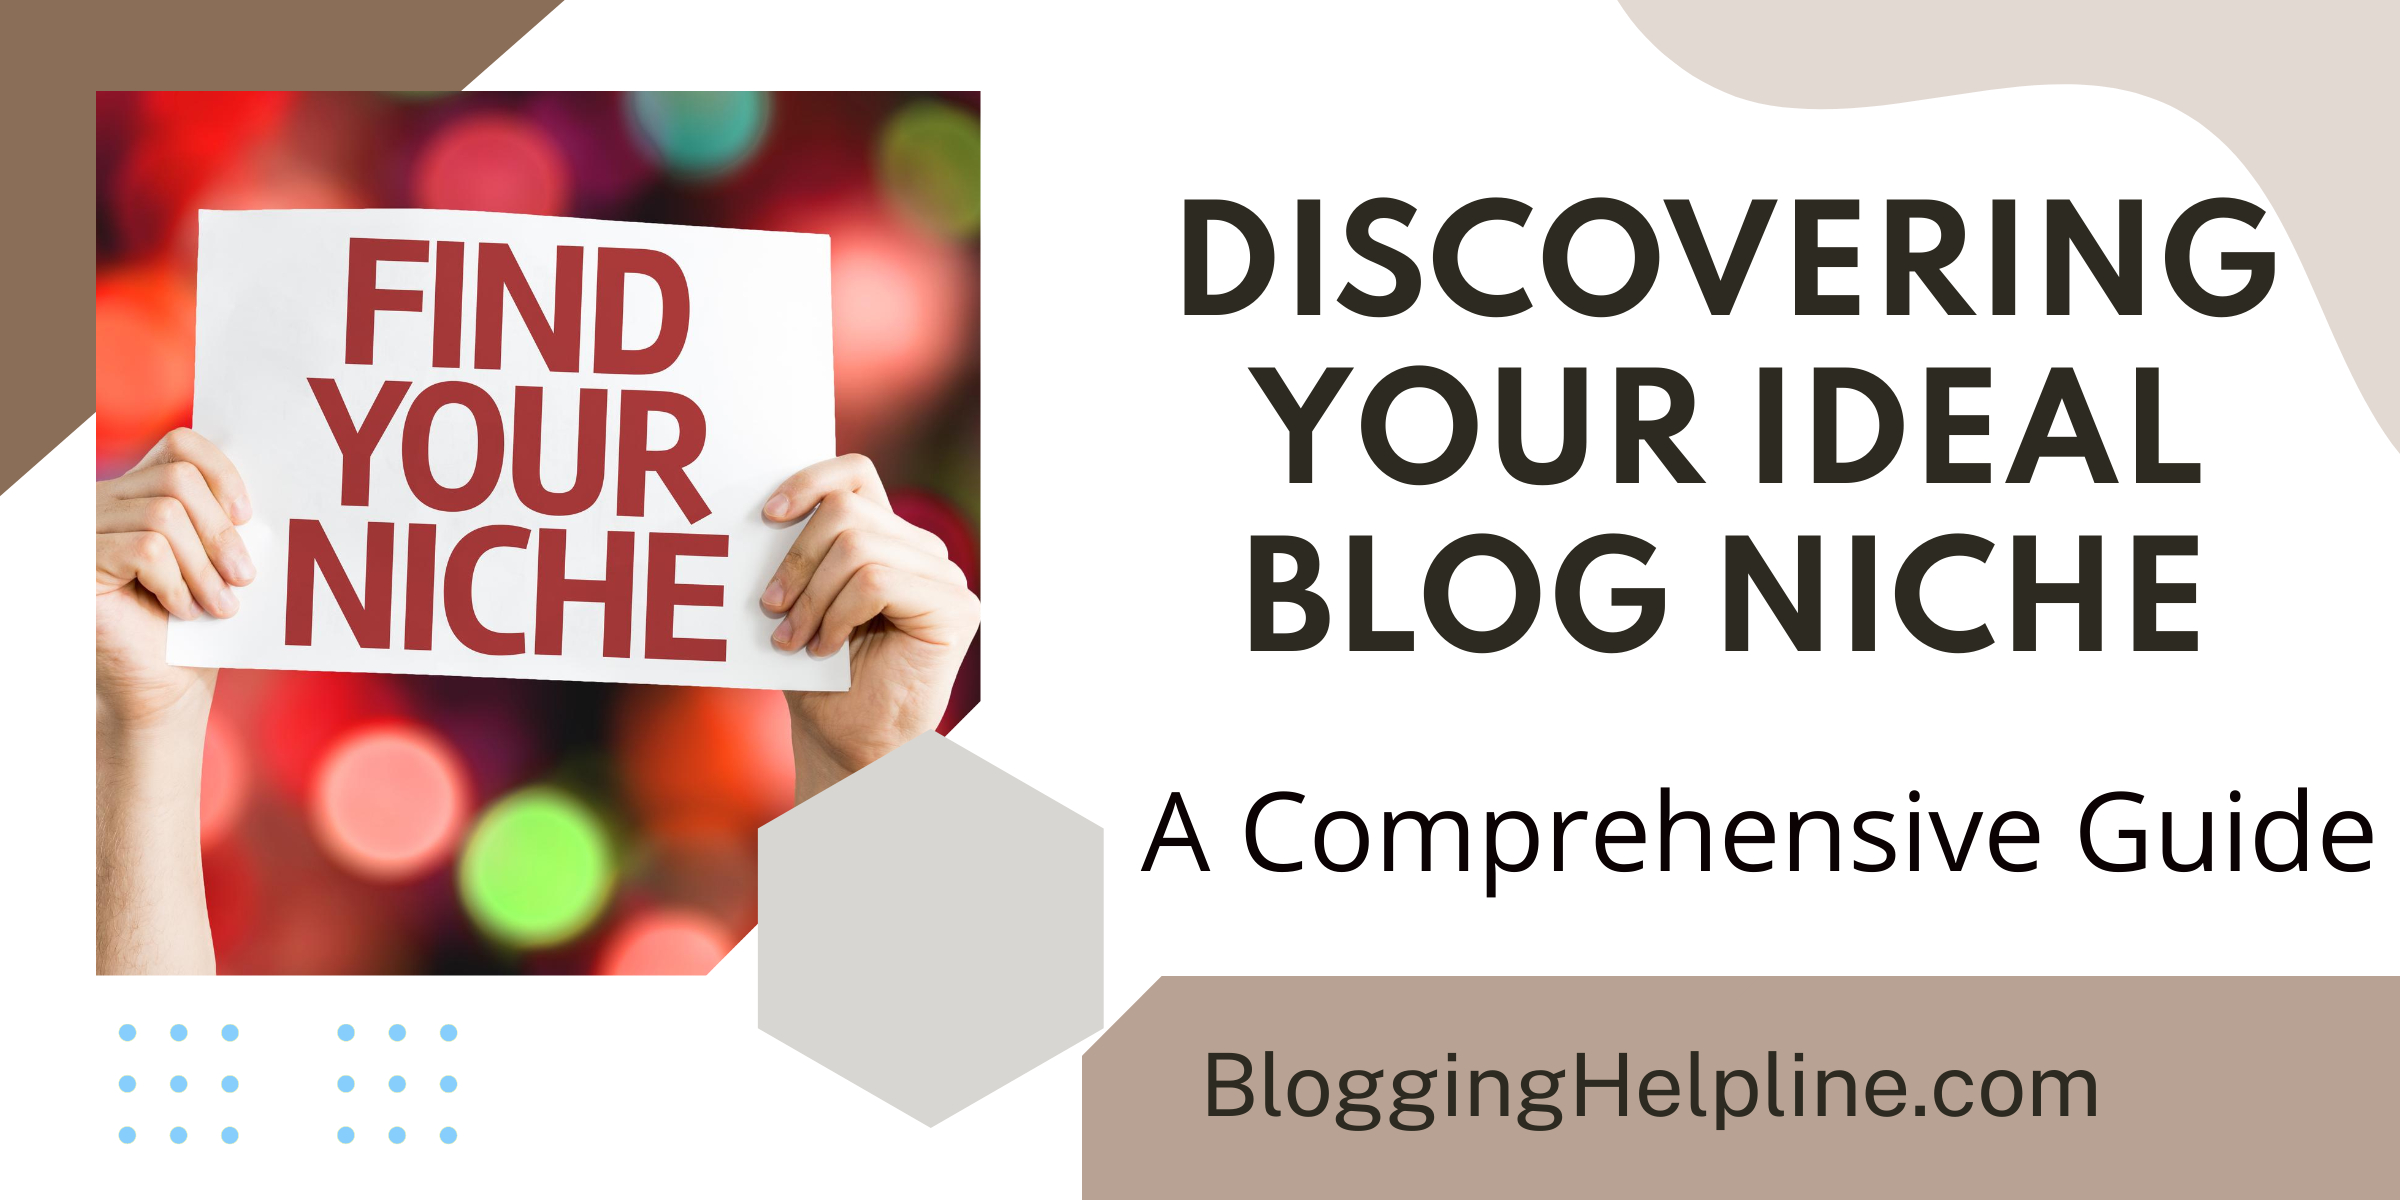 DISCOVERING YOUR IDEAL BLOG NICHE